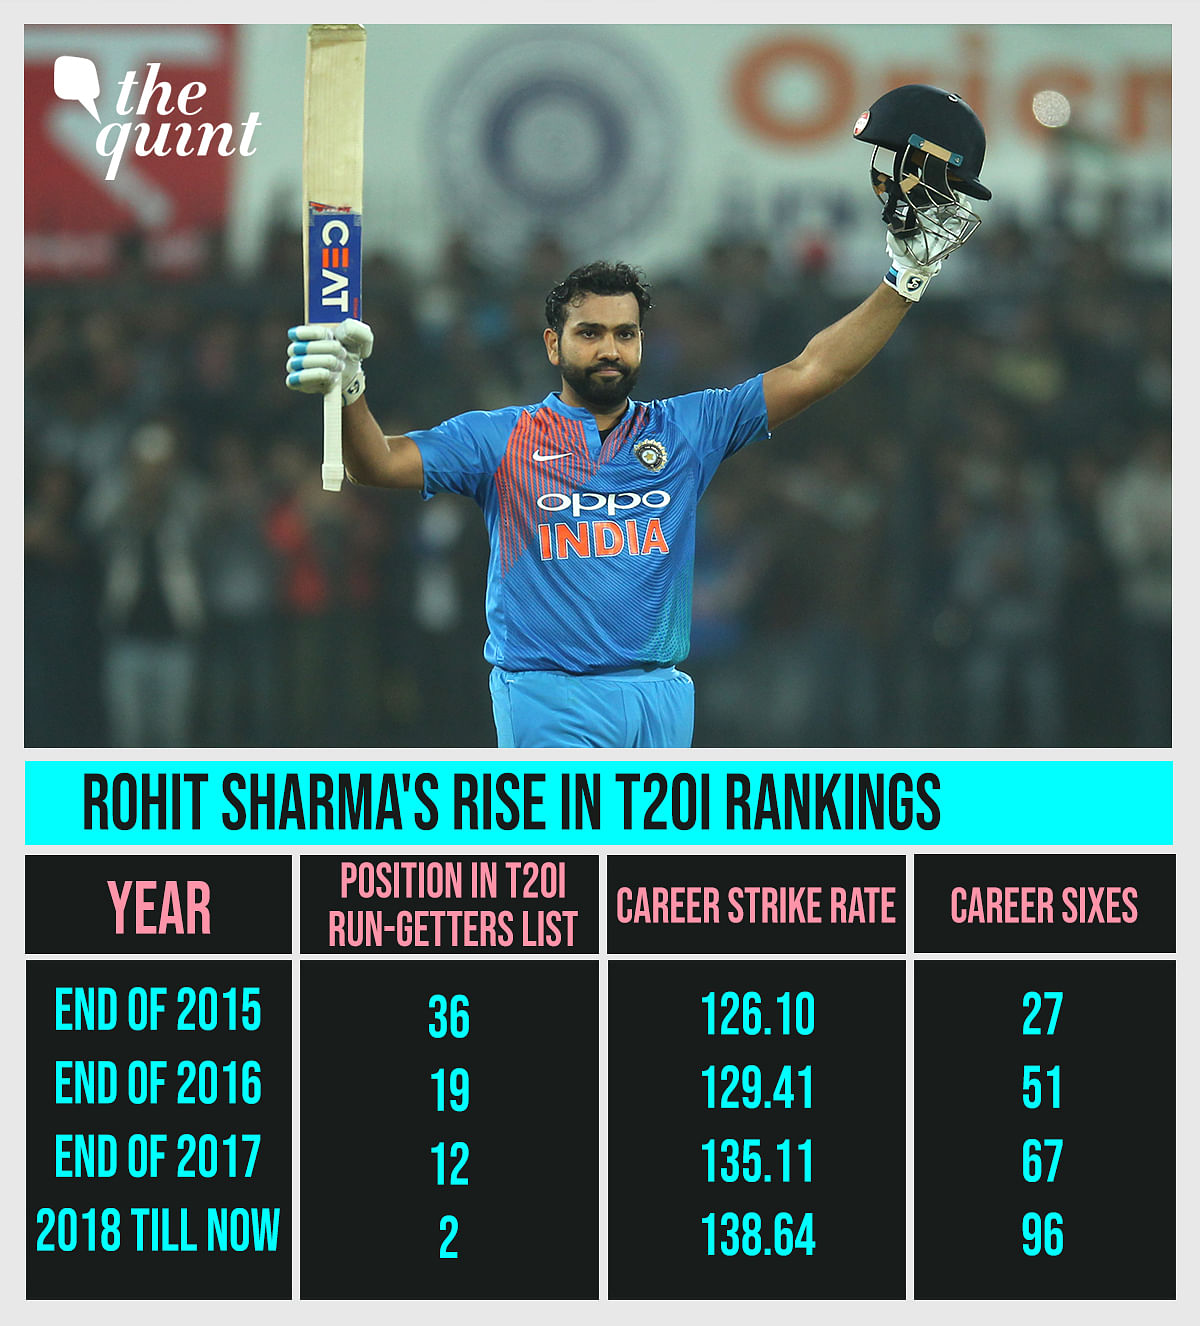 A major transformation in Rohit Sharma’s T20I graph came after he found his “template” in ODI cricket.